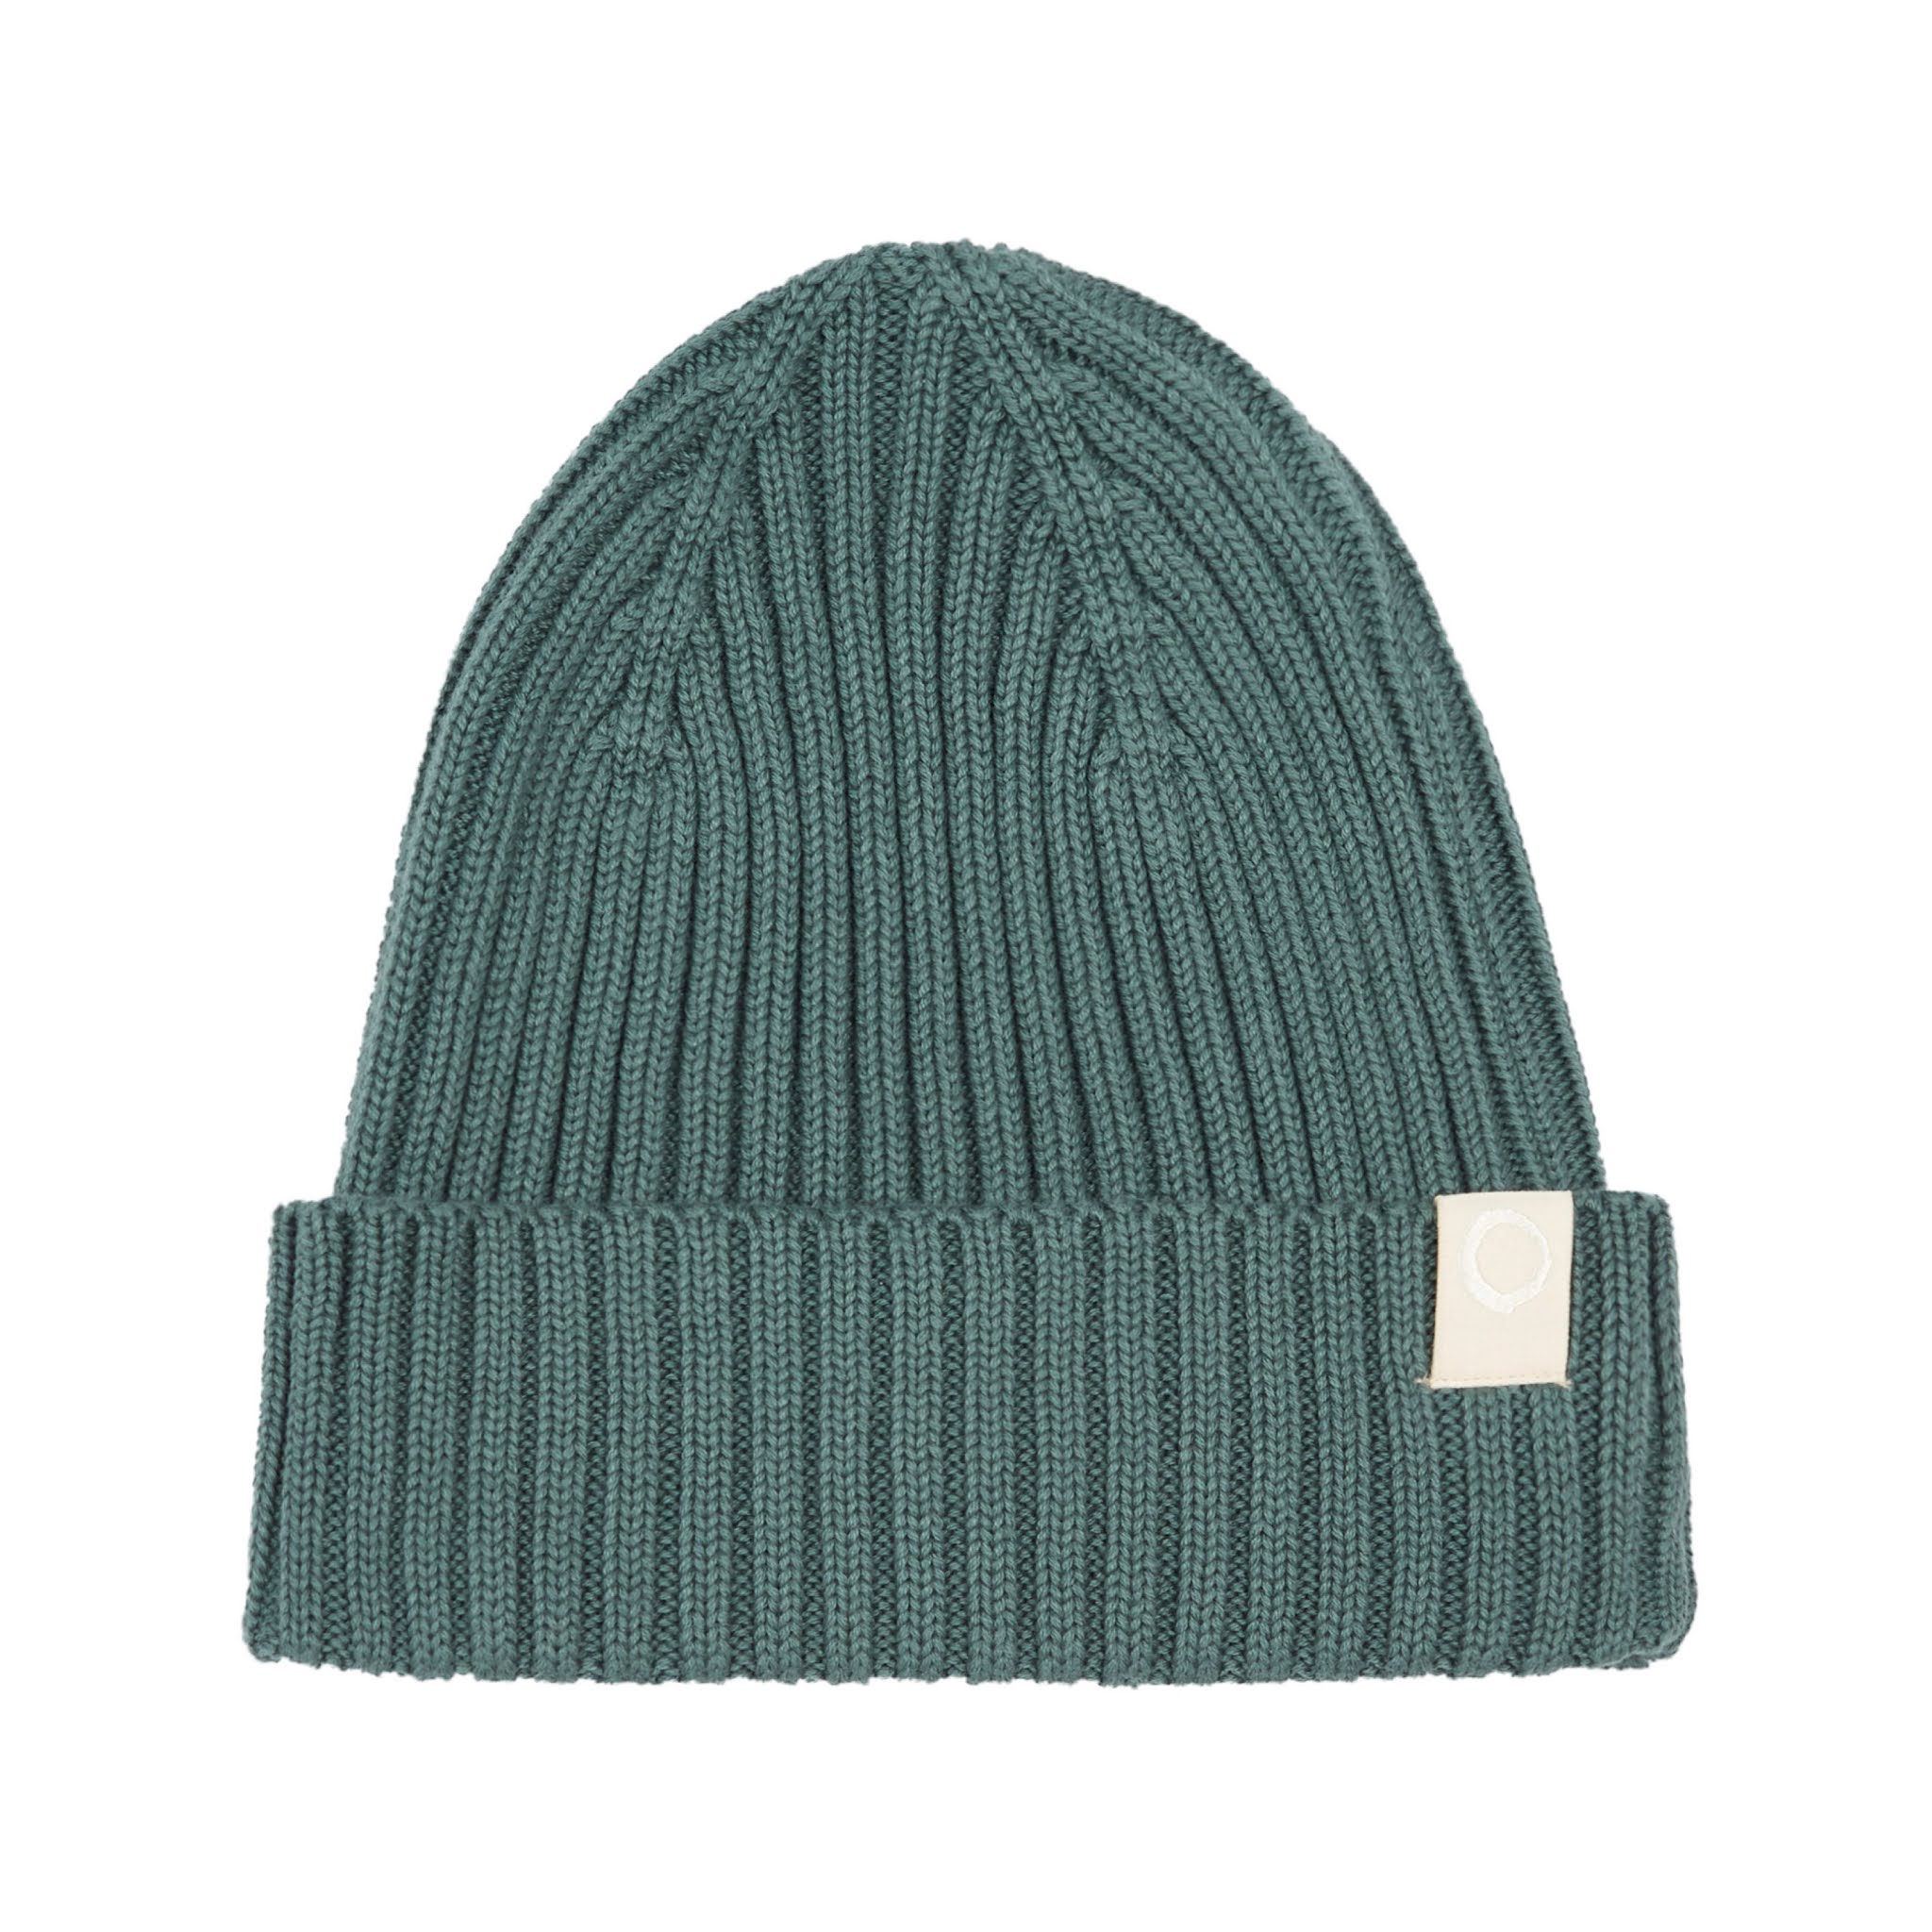 Kids Teal Organic Cotton Beanie from I Dig Denim